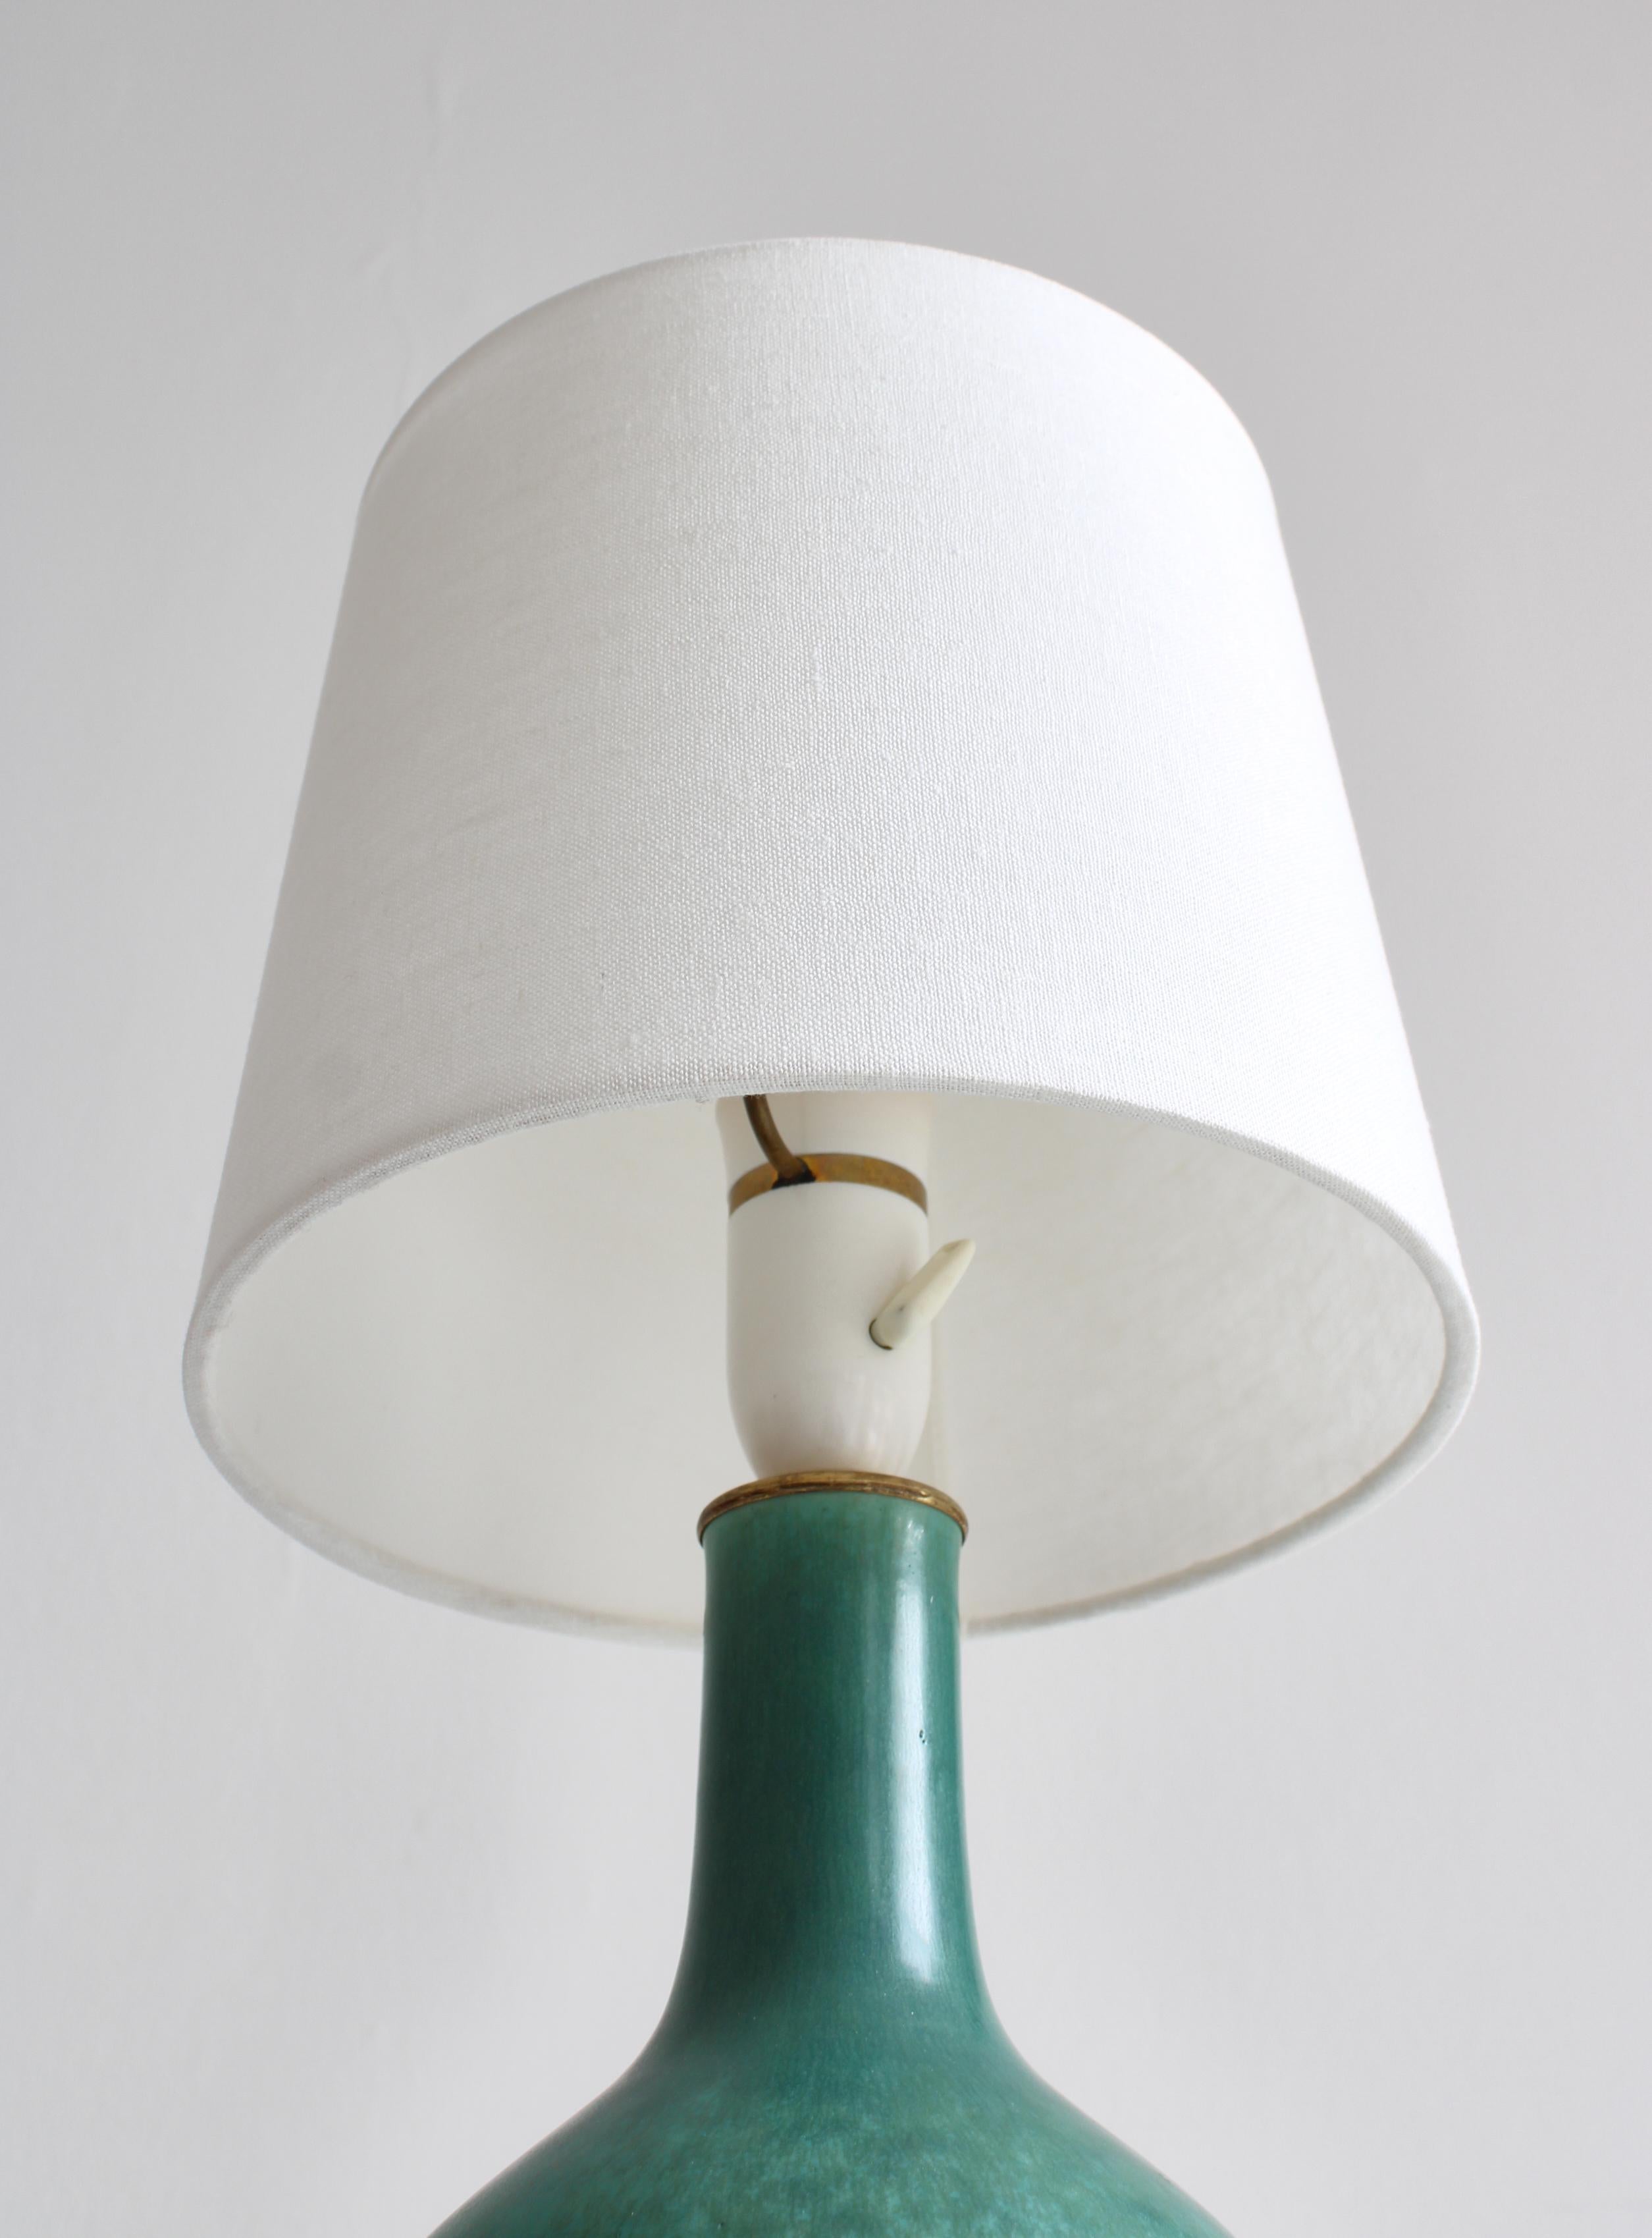 Stoneware Table Lamp by Saxbo Green Glazing Eva Staehr-Nielsen, Denmark, 1940s In Good Condition For Sale In Odense, DK